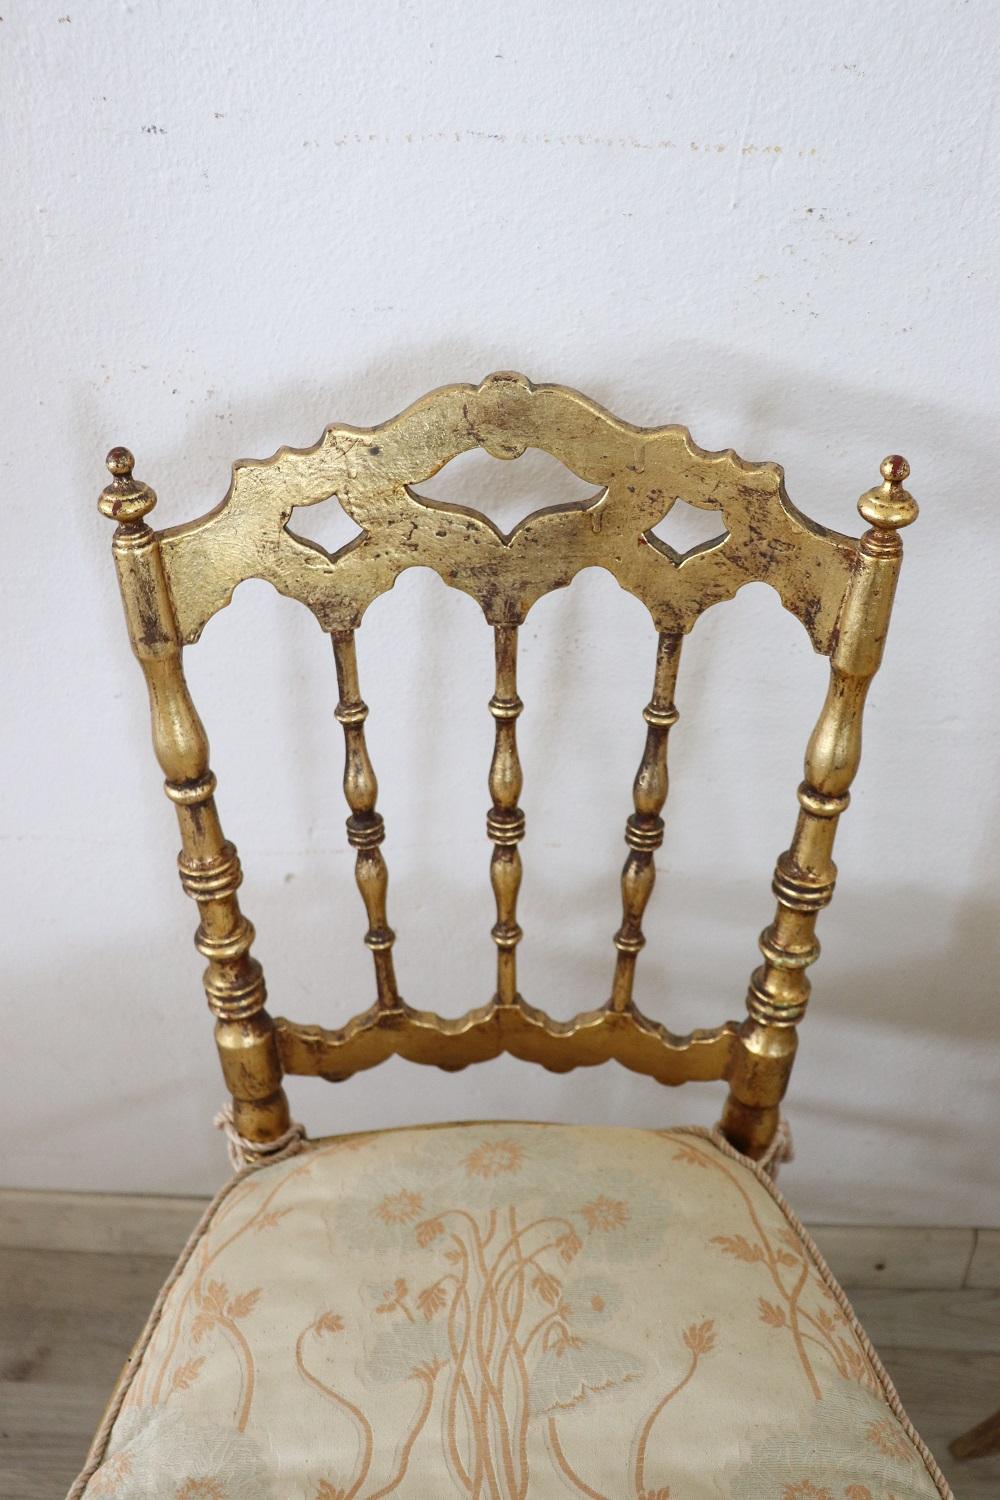 Very nice series of two chairs production of Chiavari Italy cabinetmakers laboratories. All the chairs you see on sale are antique 1880s made of turned wood. The wood is completely gilded with gold leaf. The seat in with Vienna Straw made by hand